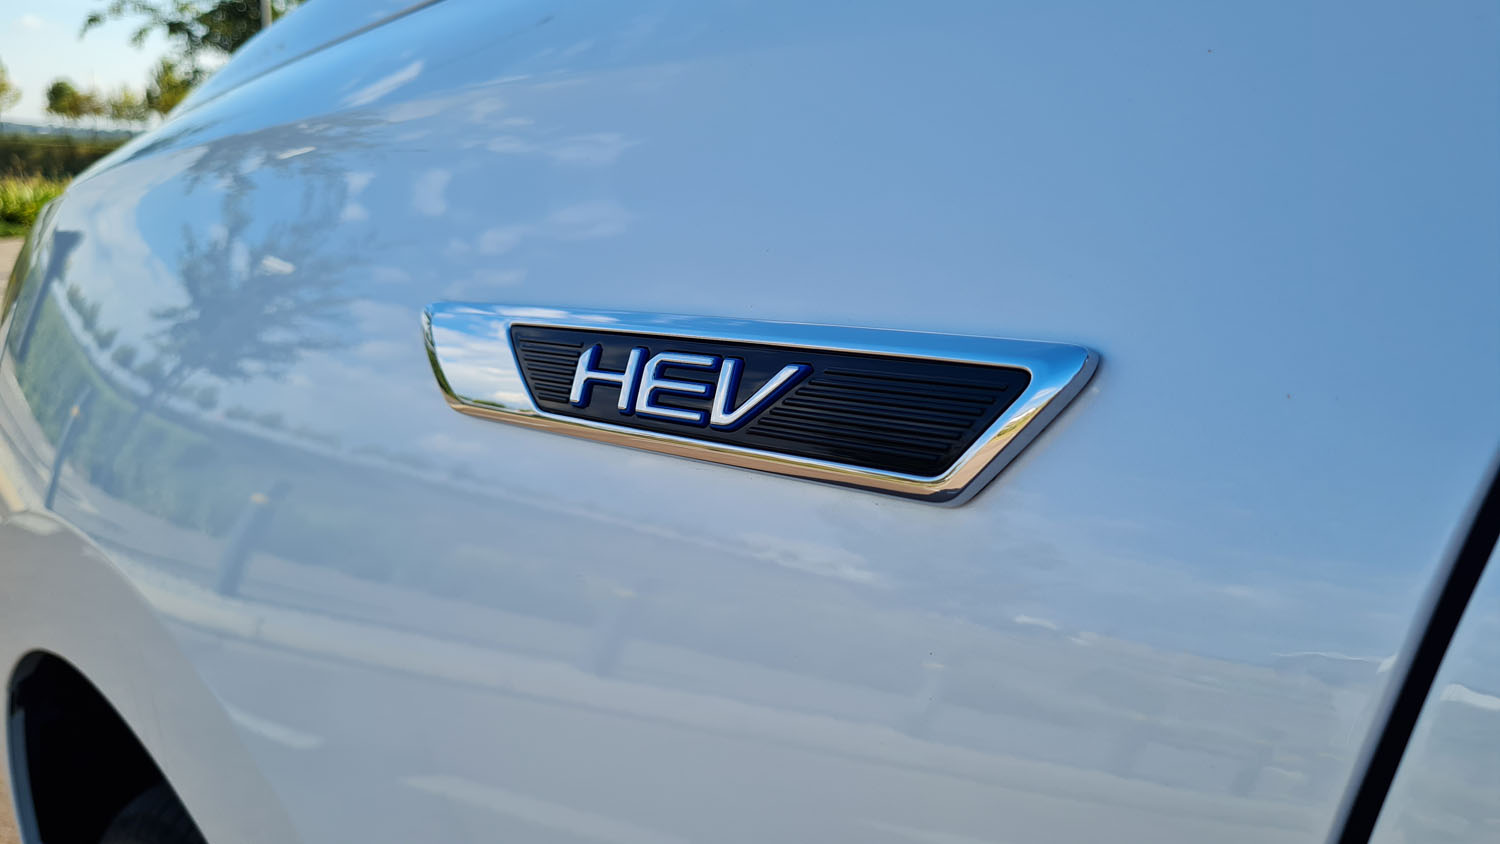 haval, haval jolion, haval jolion hev, haval jolion hev review – the future for south africa